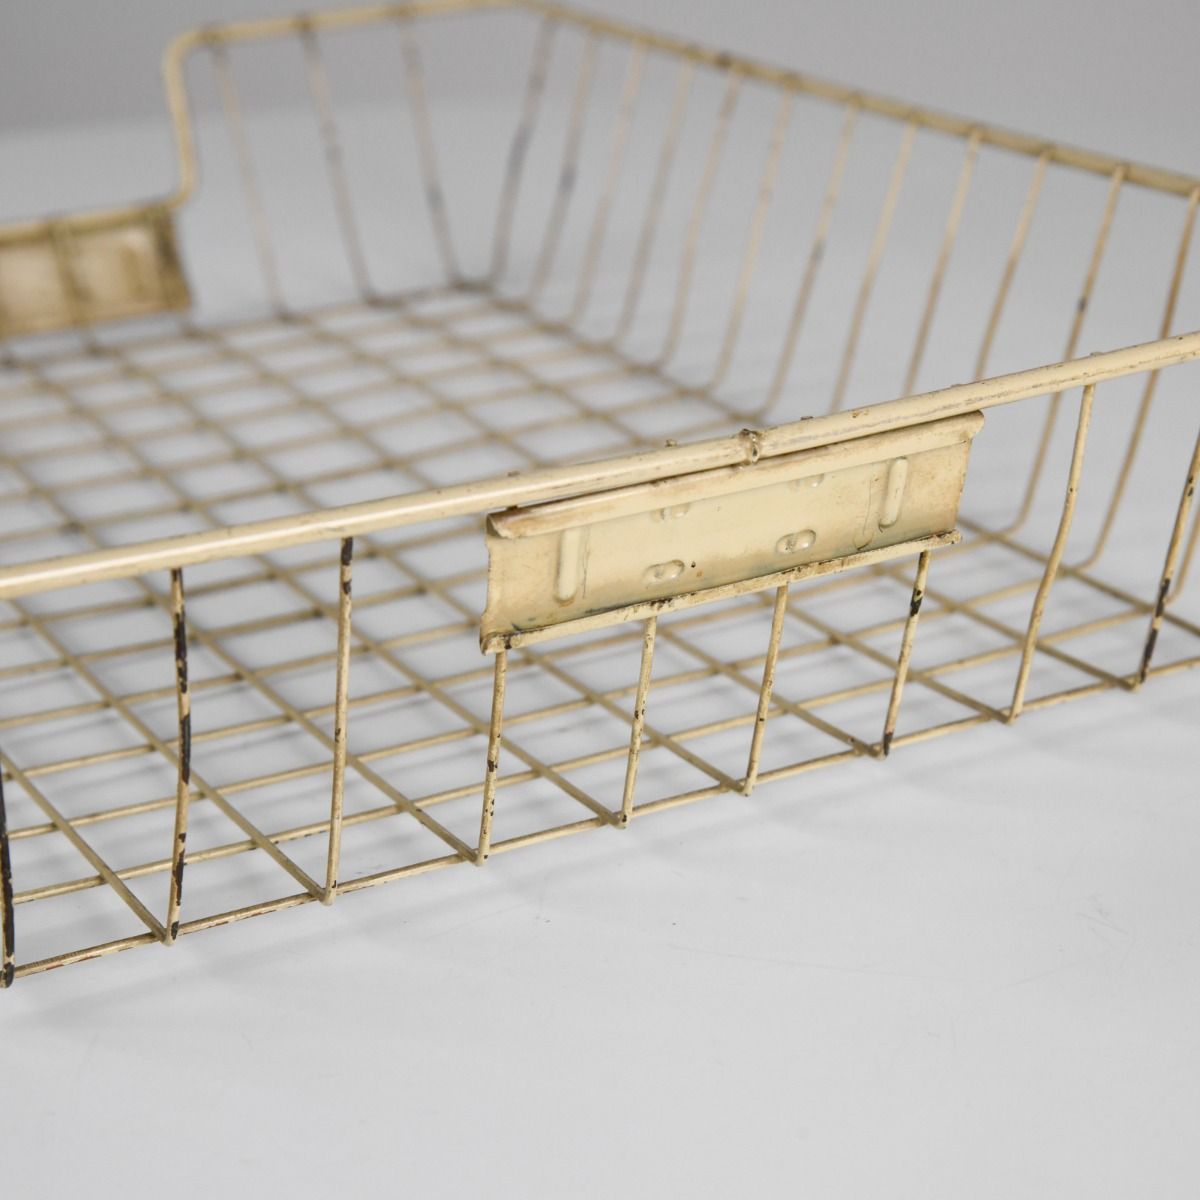 Vintage 1980s Wire Tray